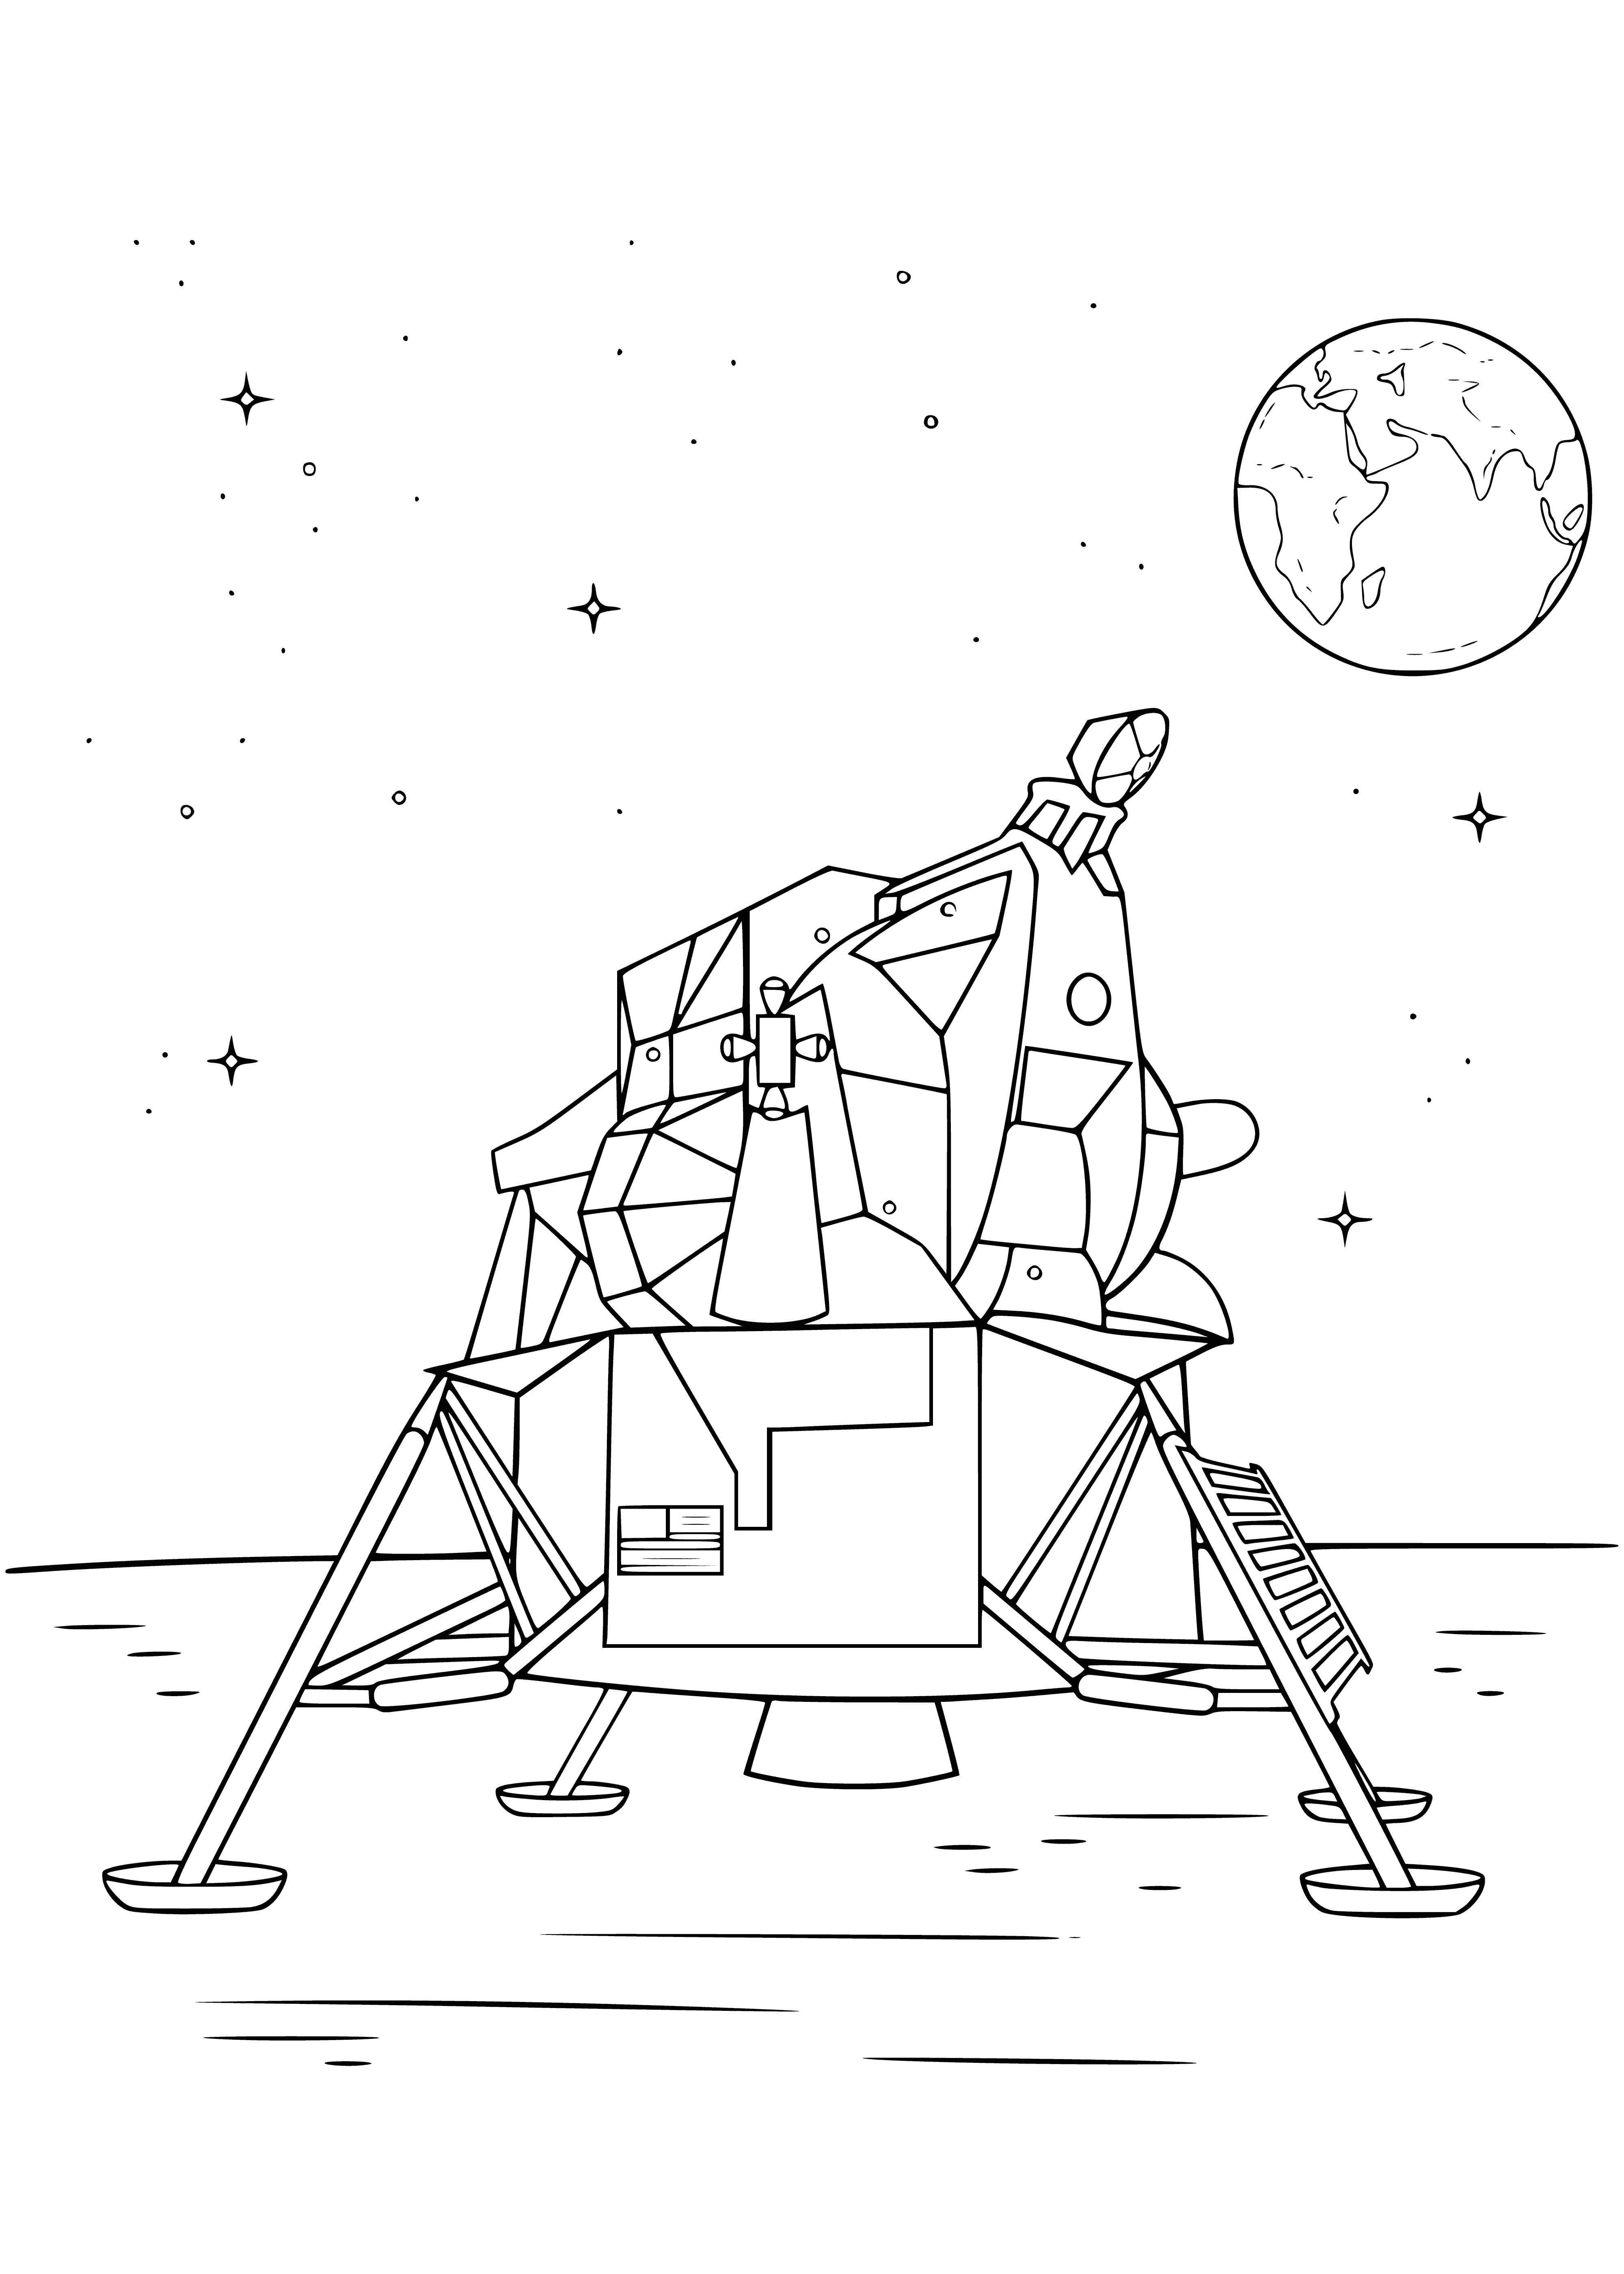 coloring page: Human is walking on moon in white suit/blue helmet with grey backpack, in crater w/ black backdrop. #space #moonwalker